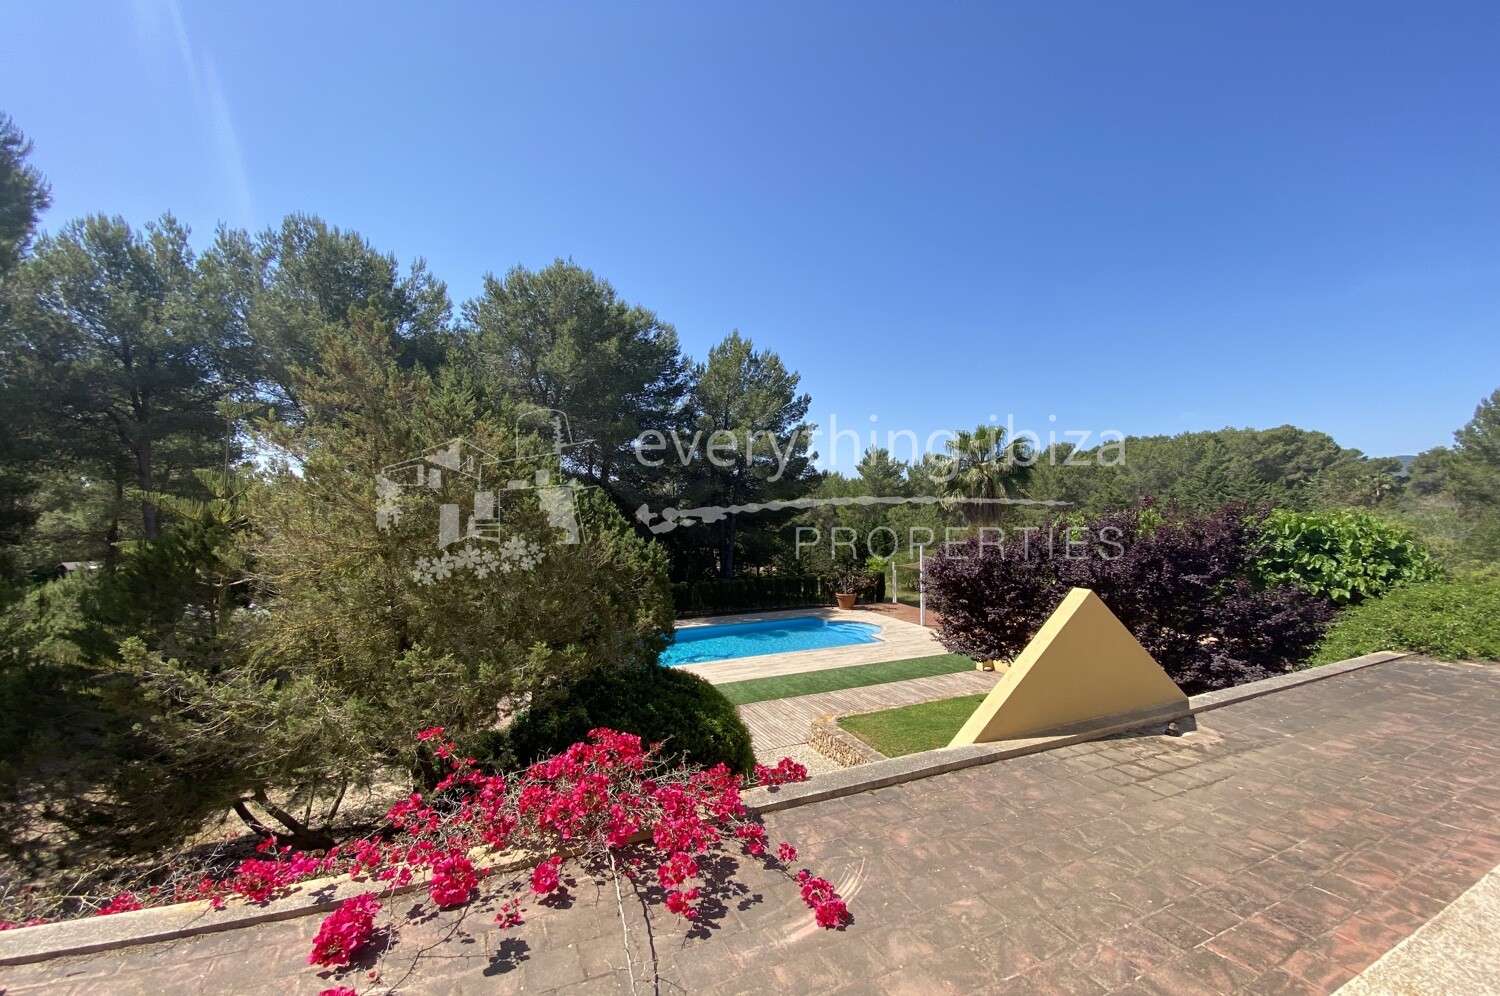 Elegant Villa Set in Large Country Plot Yet Close to Ibiza, ref. 1458, for sale in Ibiza by everything ibiza Properties